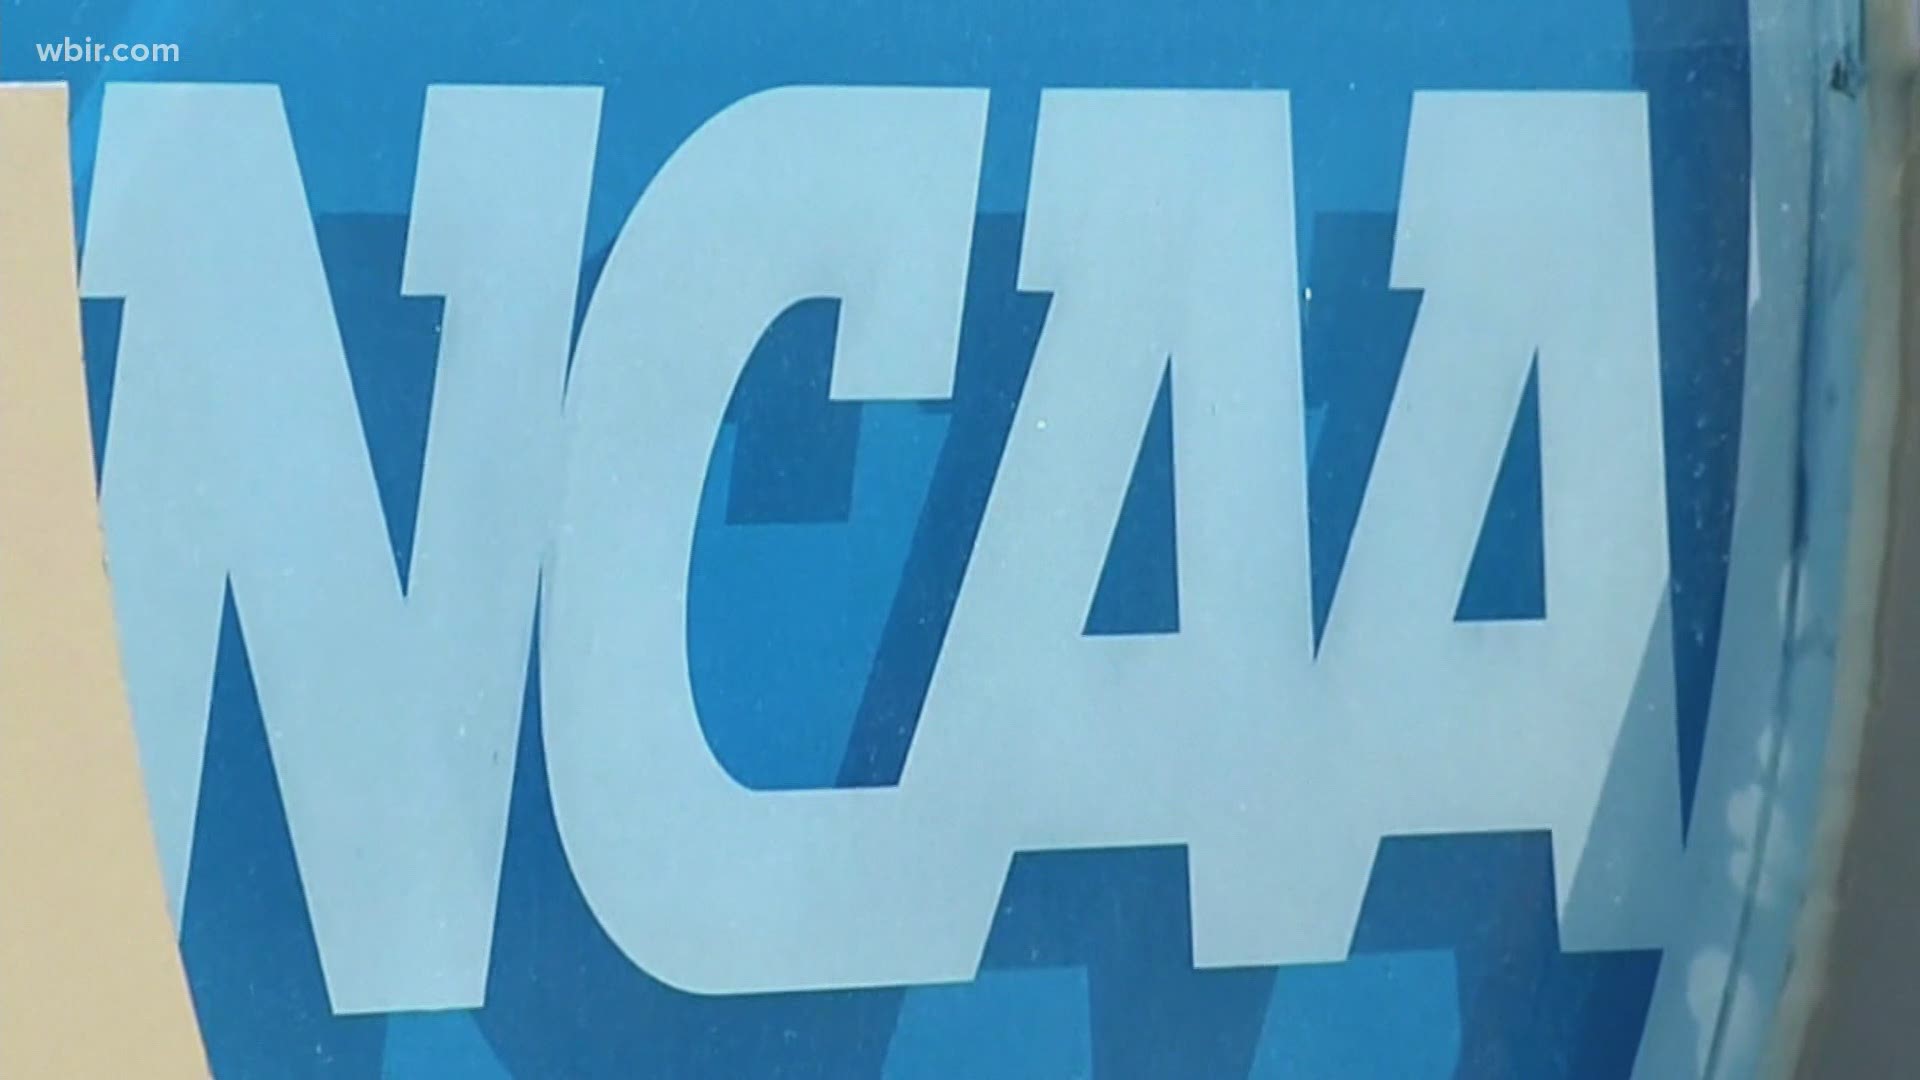 The NCAA is considering a plan that would lay the framework for college athletes to profit from their name, image and likeness.